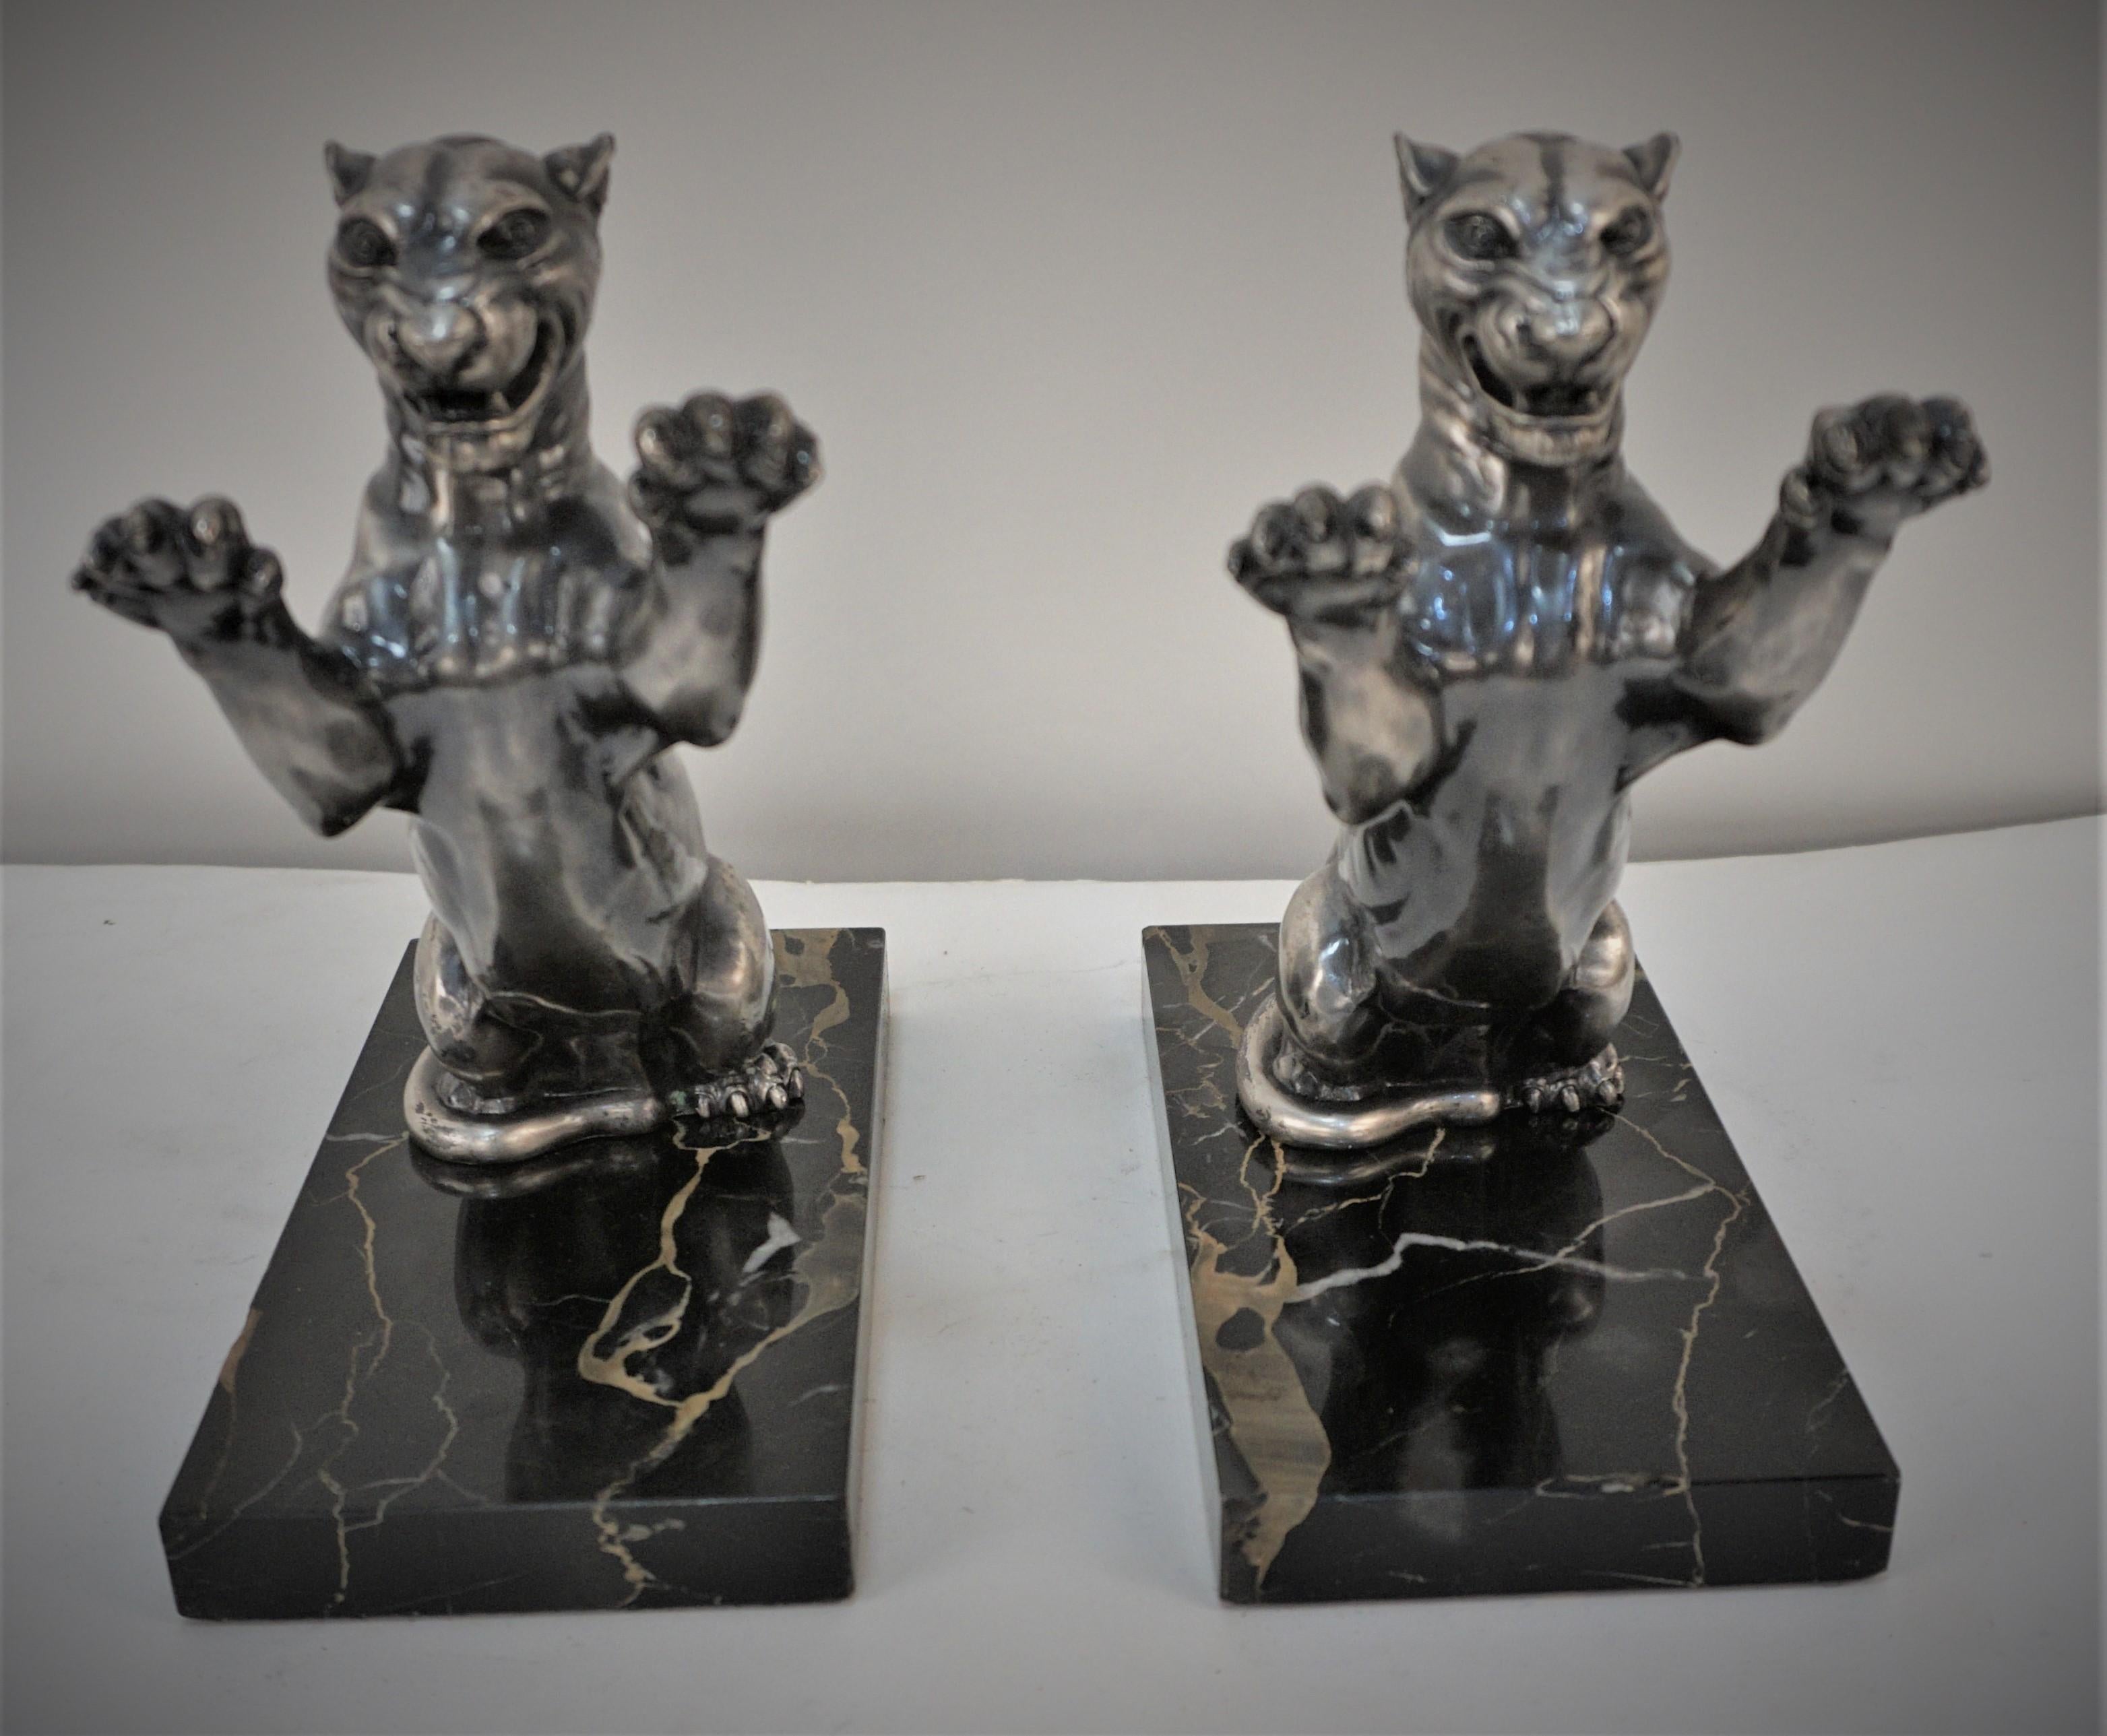 French 1930's silver plate tiger on marble bookends by Parrina Paris.
Measurement is only for one bookend.